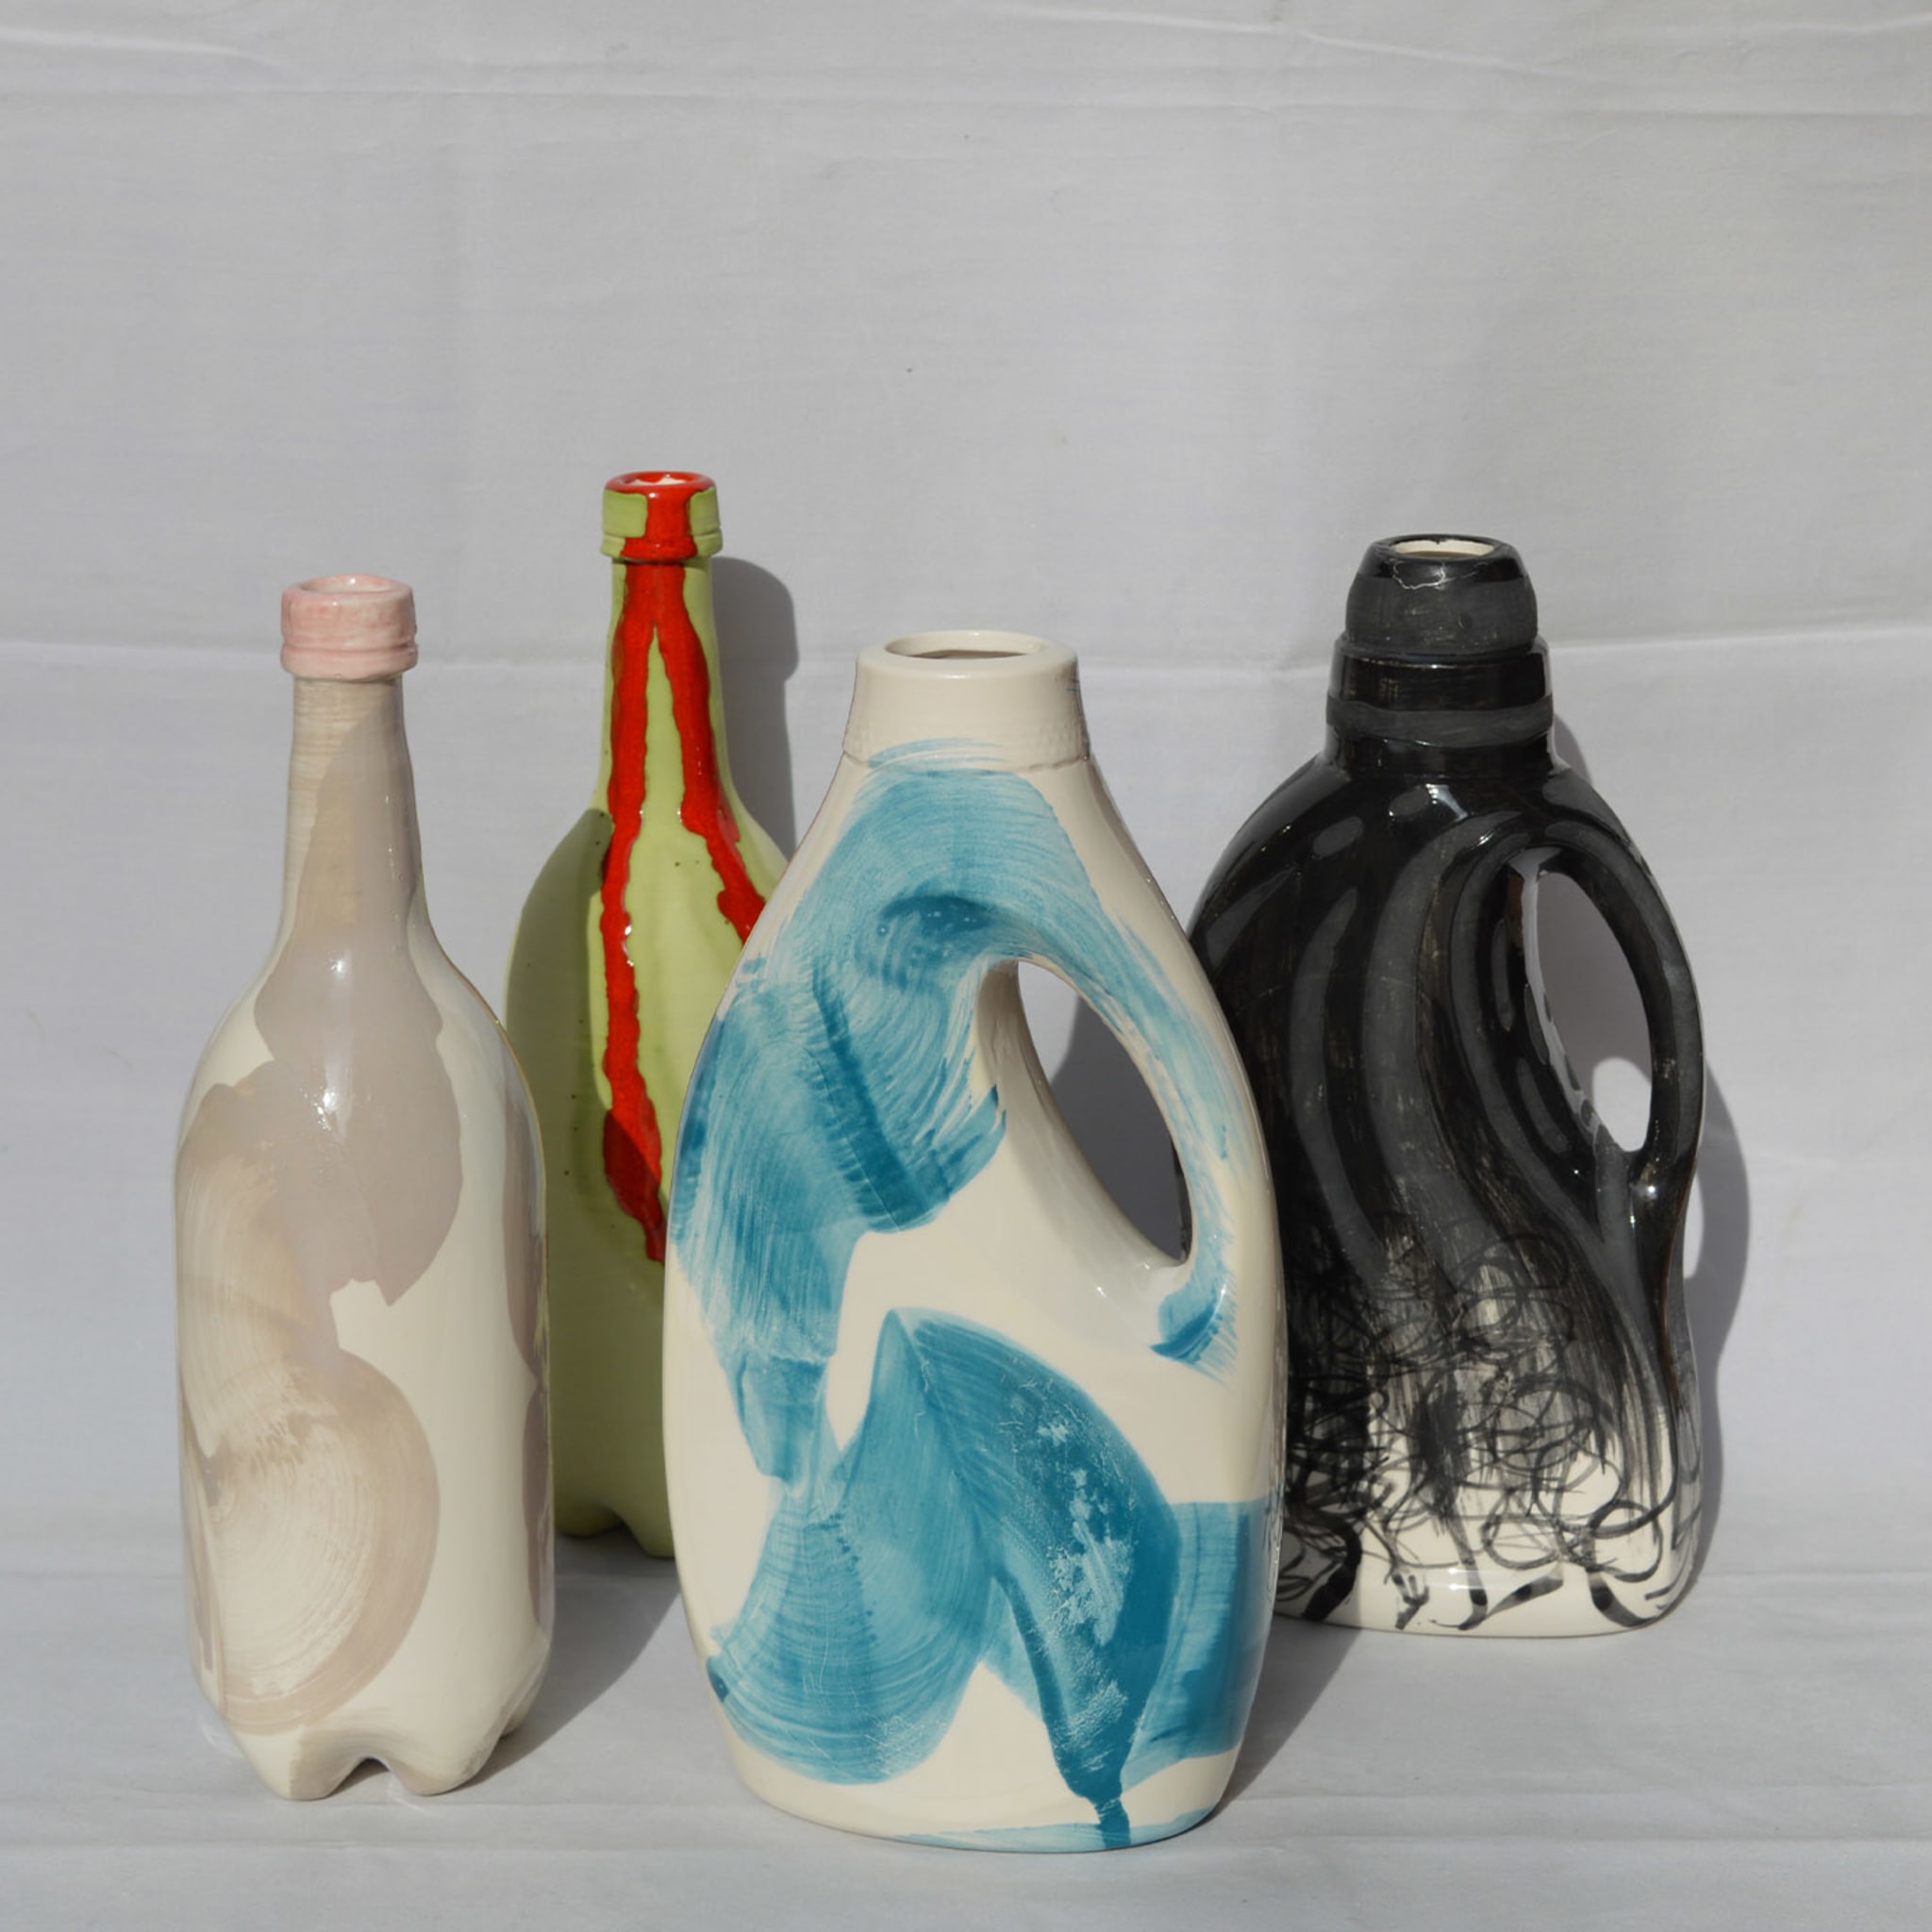 More Clay Less Plastic White and Blue Bottle - Alternative view 1